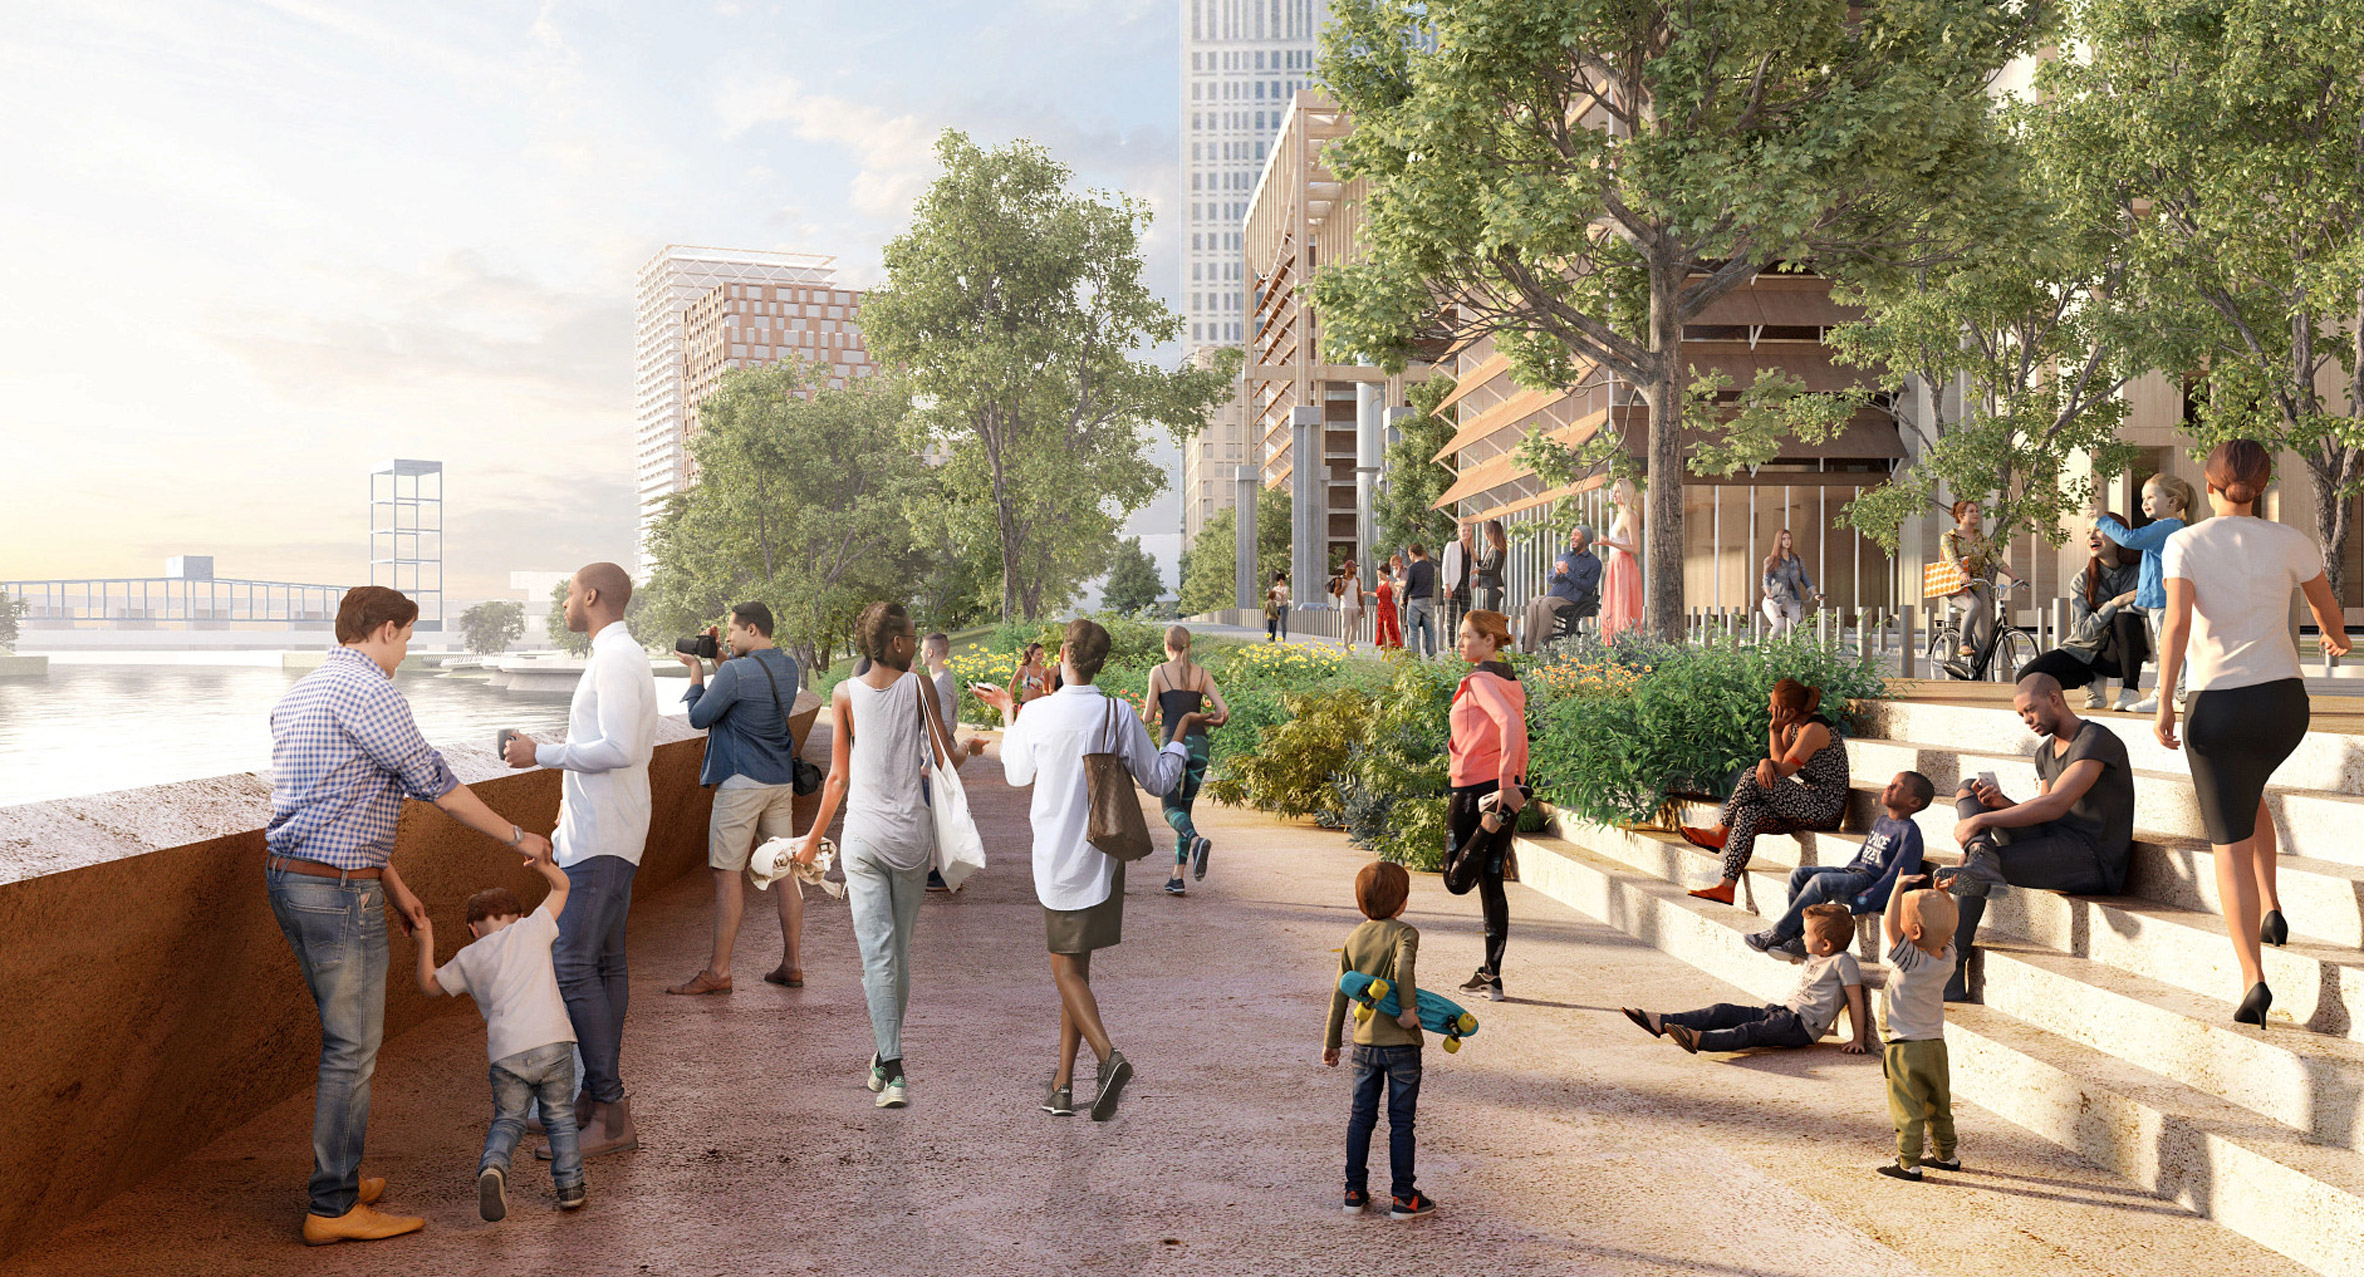 Rendering of people walking on new Cleveland waterfront